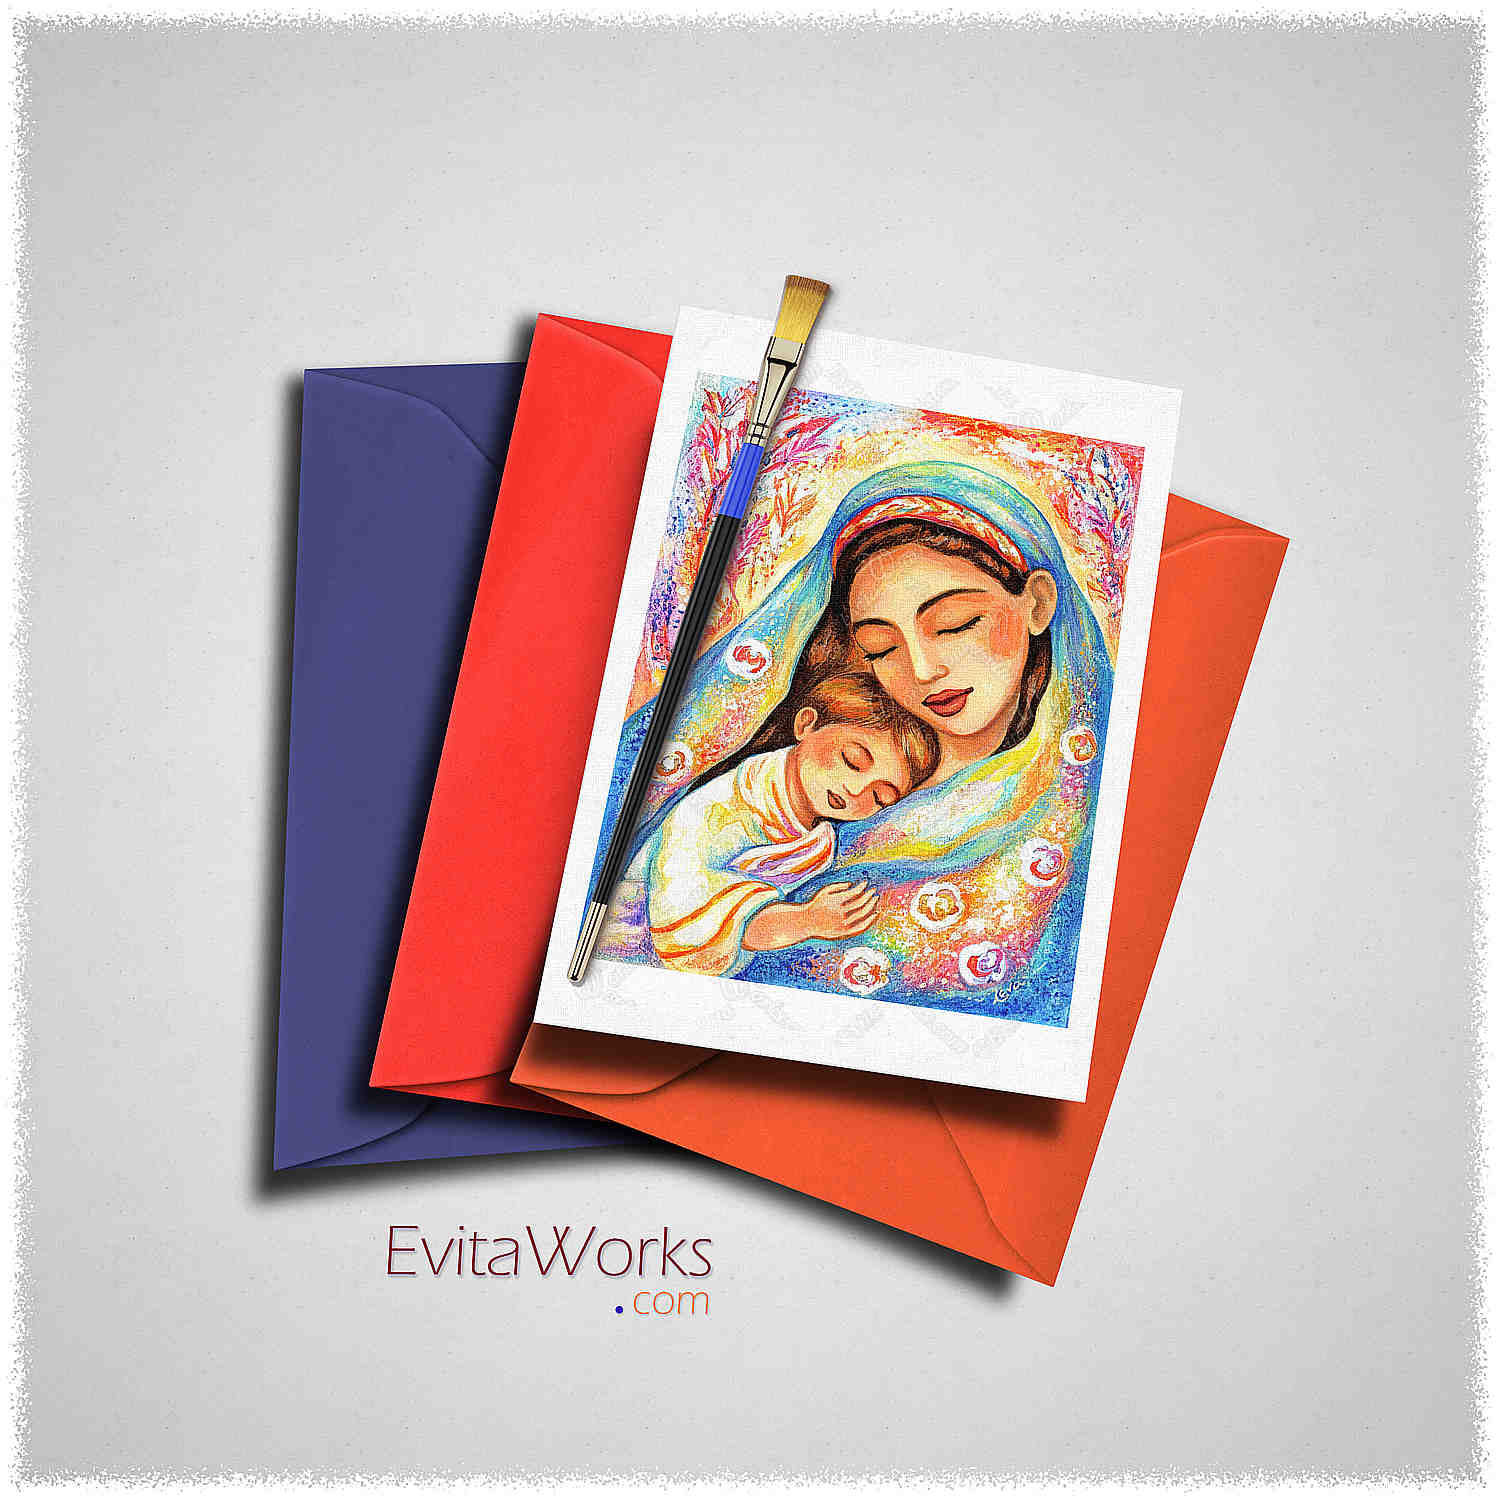 Hit to learn about "Inner Silence, mother and child" on cards